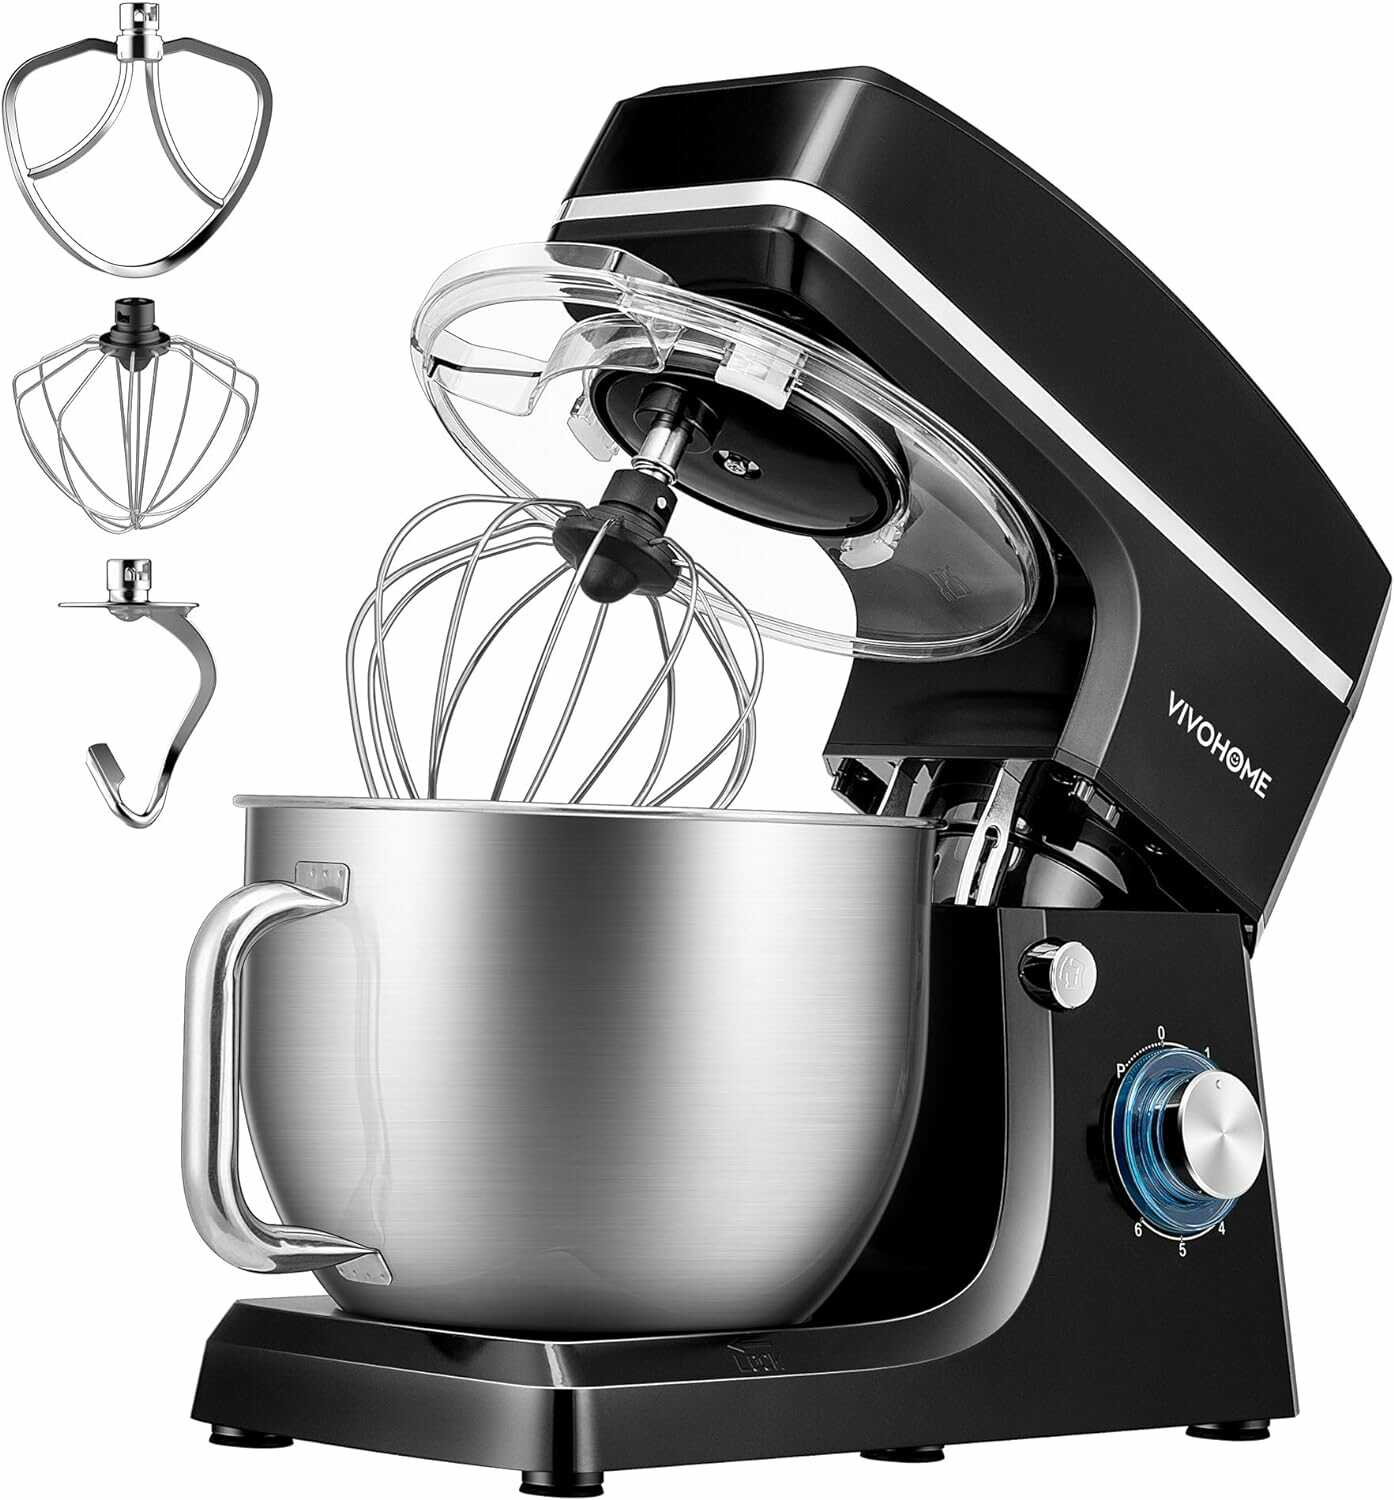 VIVOHOME Electric Stand Mixer 7.5 Quart with Beater, Dough Hook, Wire Whip, and Egg Separator